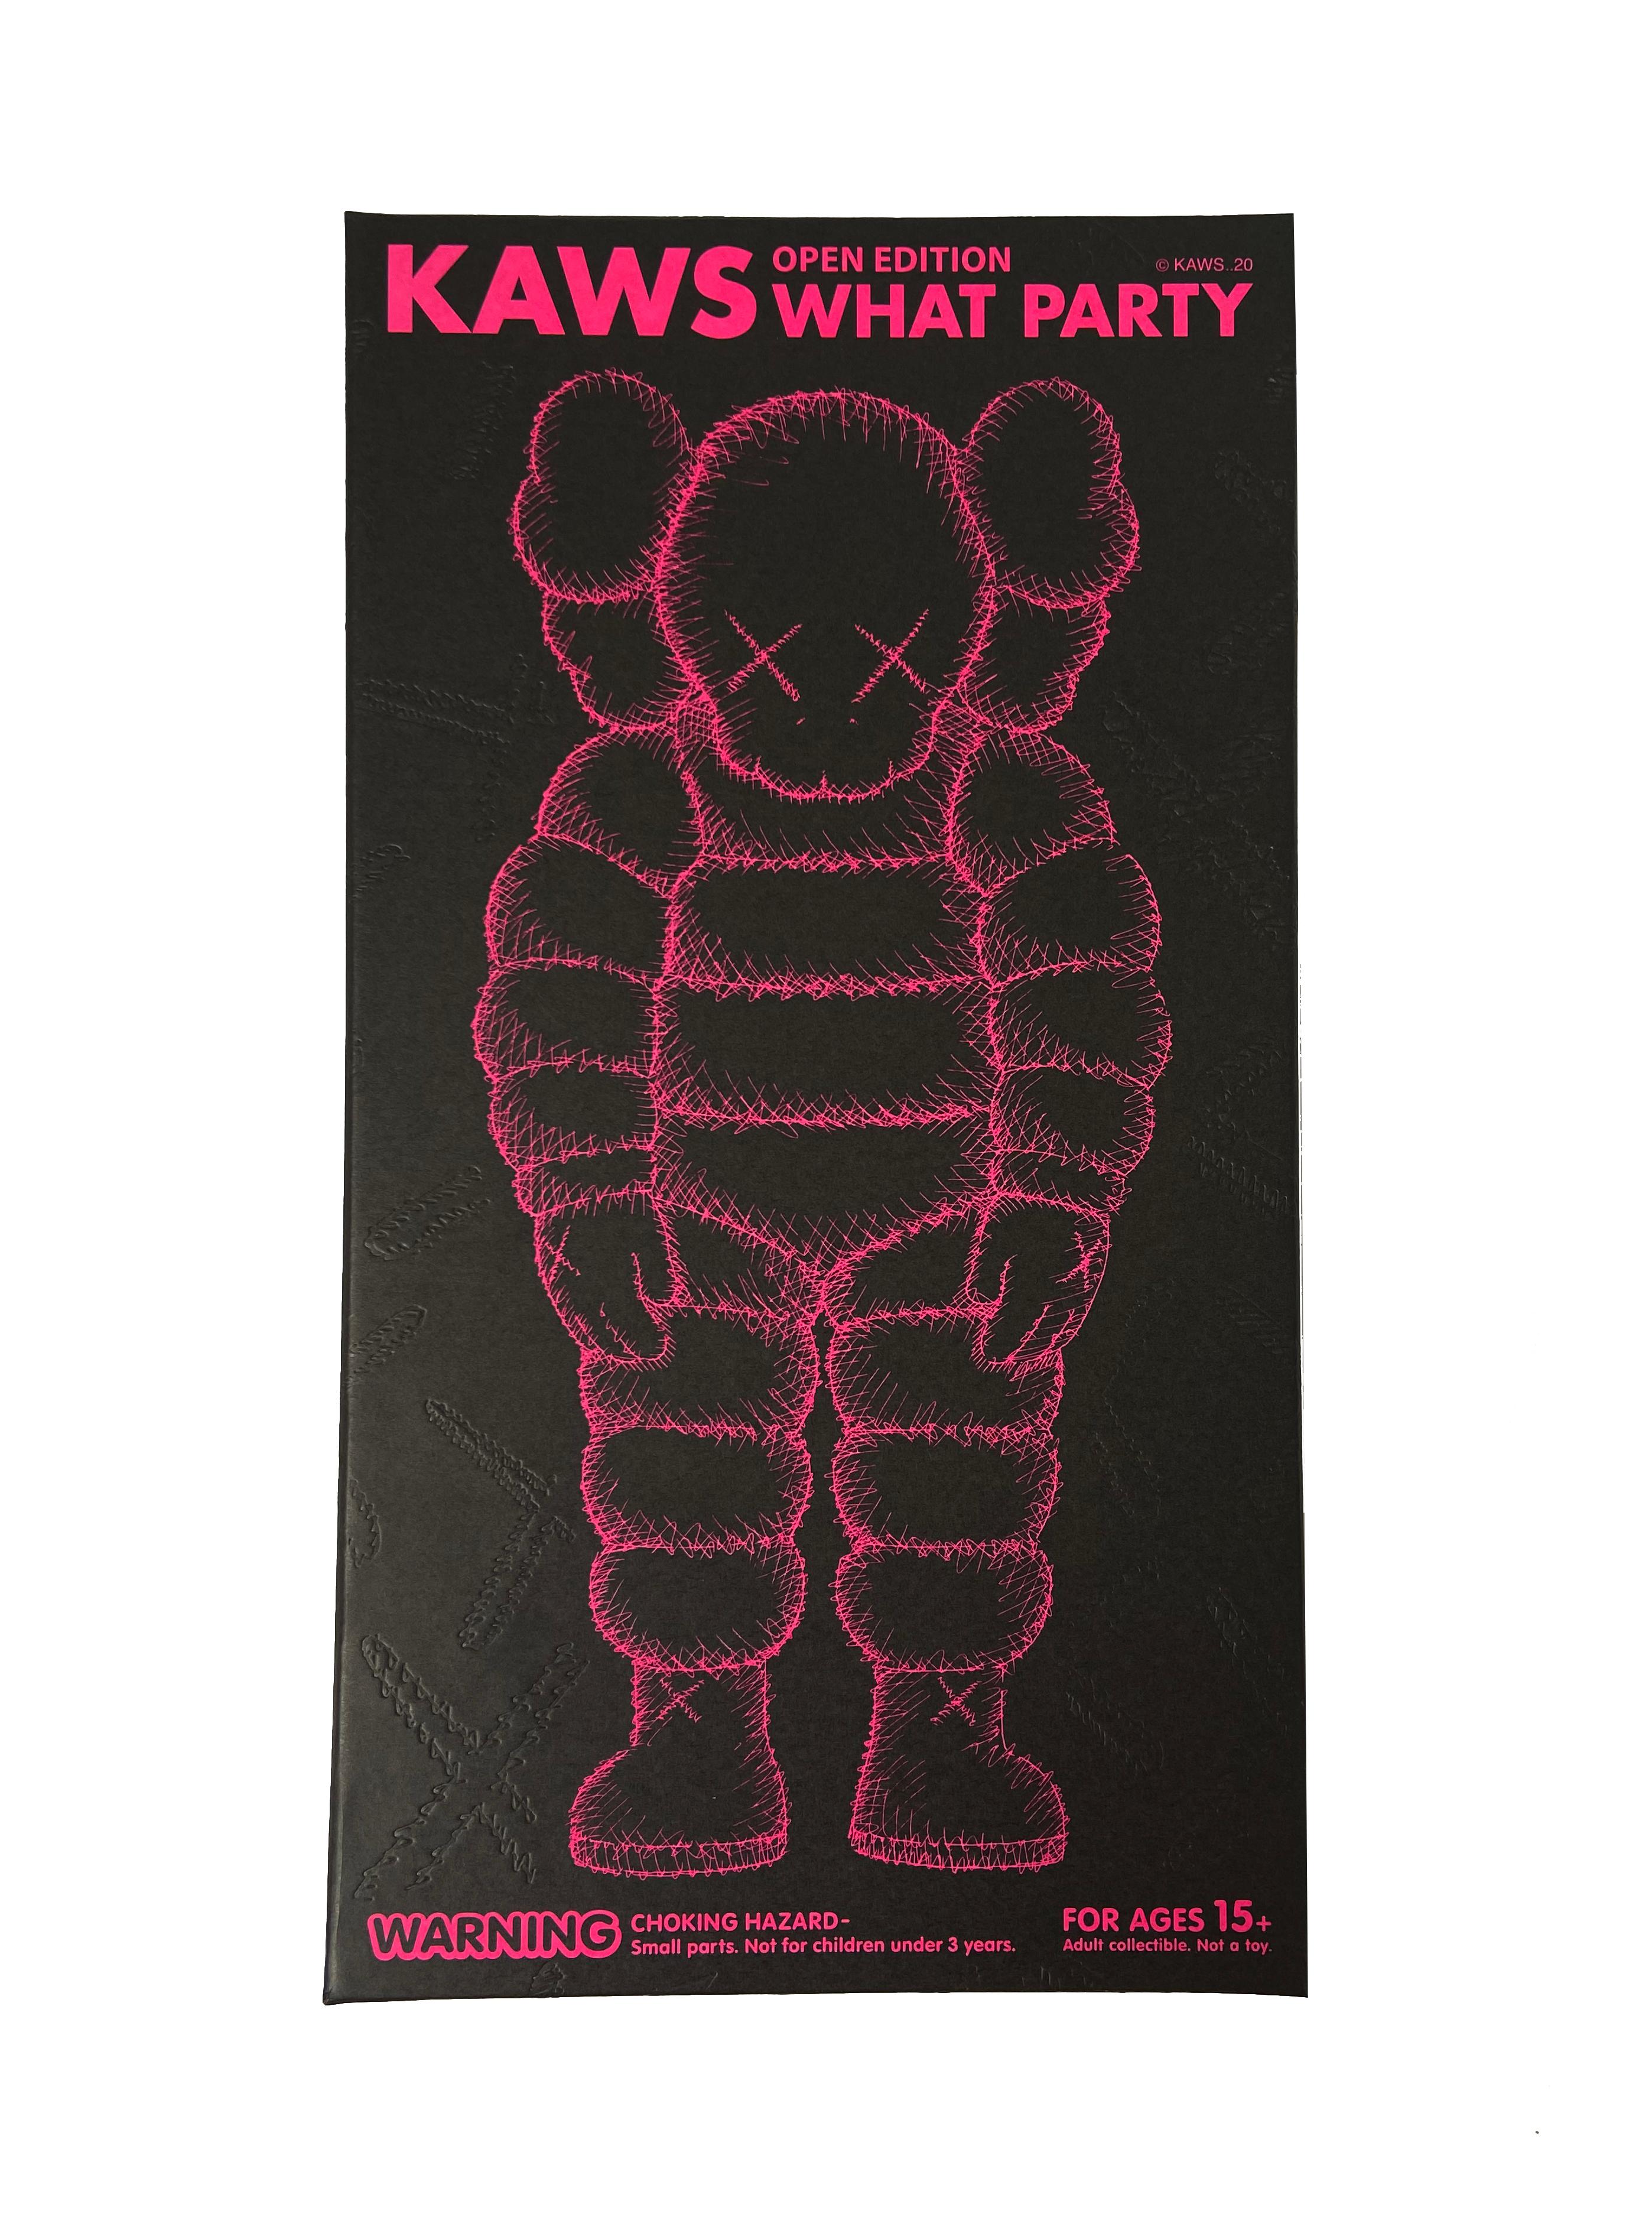 KAWS WHAT PARTY (pink):
KAWS pink WHAT PARTY Companion featuring KAWS' CHUM character in a hunched position. Published to commemorate the debut of KAWS’ larger scale sculptural version of same at K11 Musea Hong Kong & The Brooklyn Museum. Each new